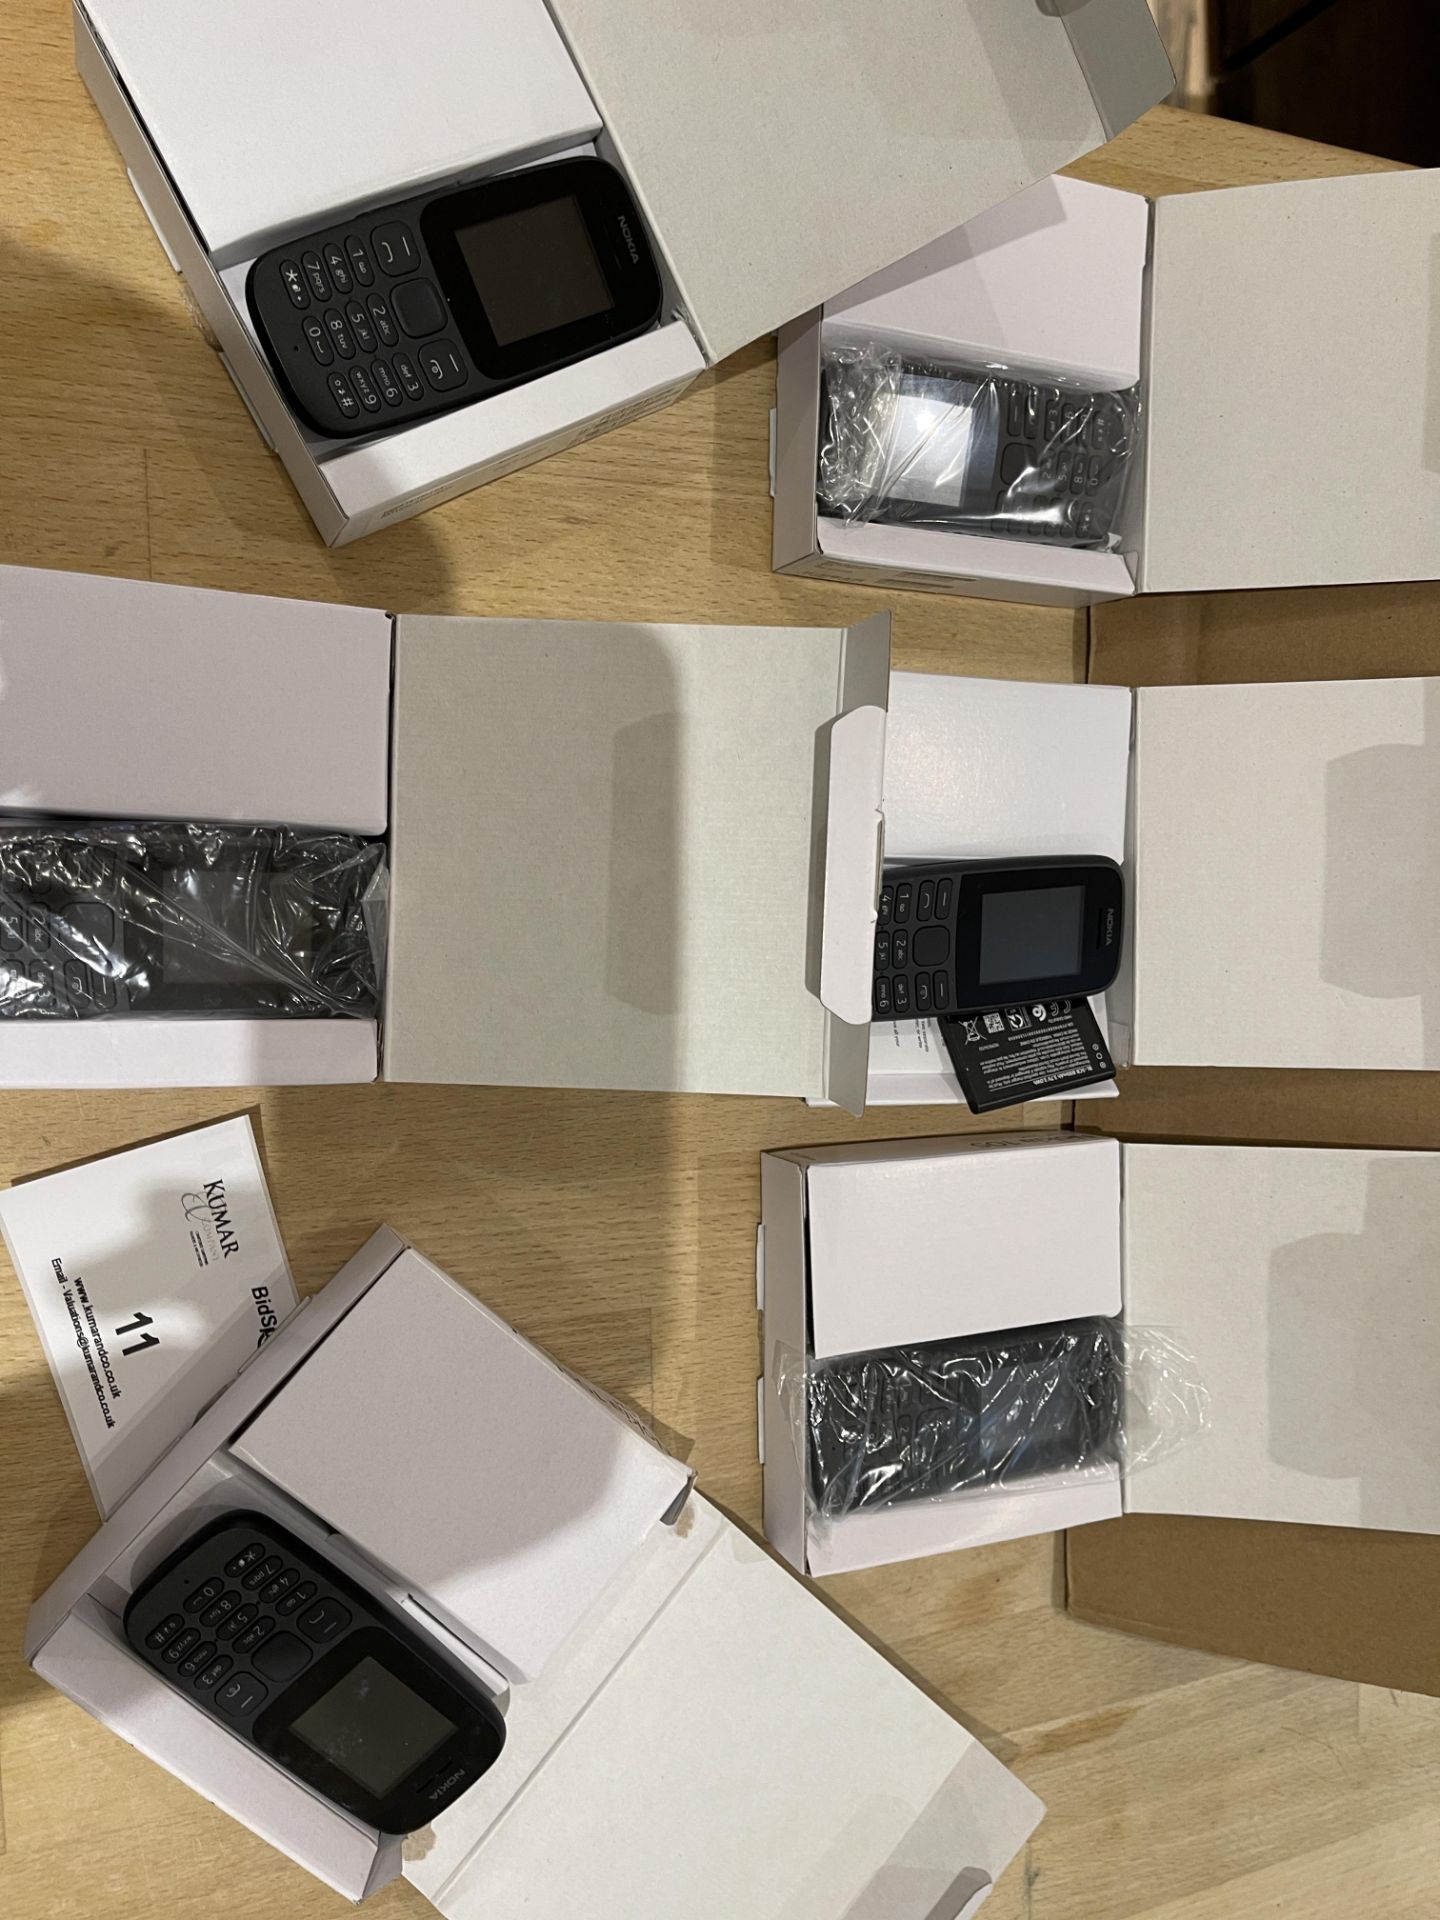 6: Nokia 105 Dual Sim Mobile Phones, Boxes Have Been Opened, Phone, Battery & Charger All Present - - Image 12 of 15